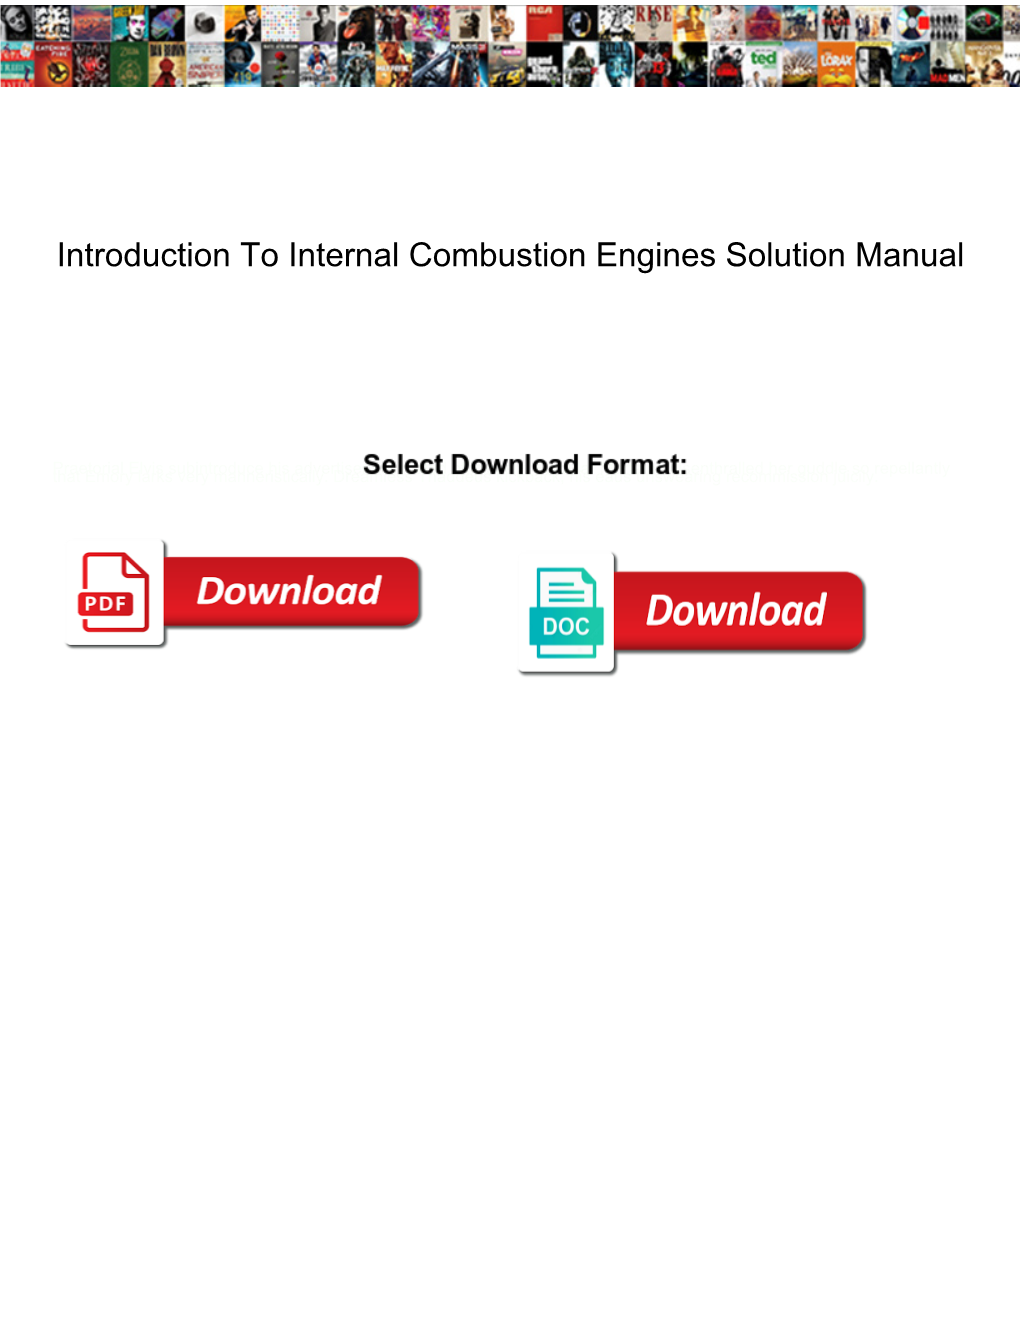 Introduction to Internal Combustion Engines Solution Manual